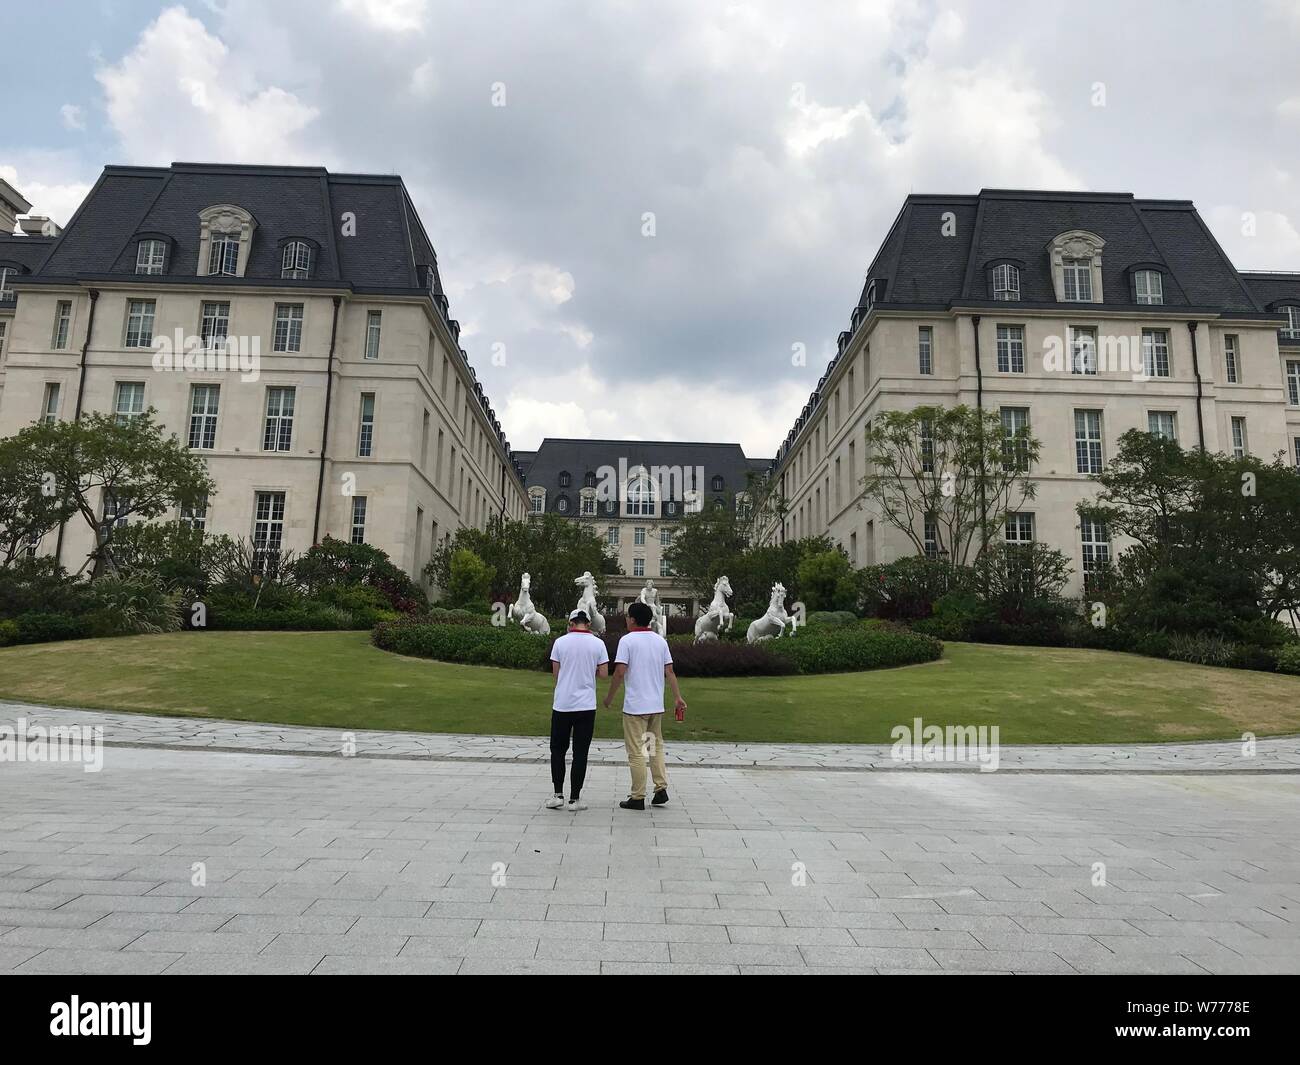 28 June 2019, China, Dongguan: People are standing in front of a replica of  the Cité